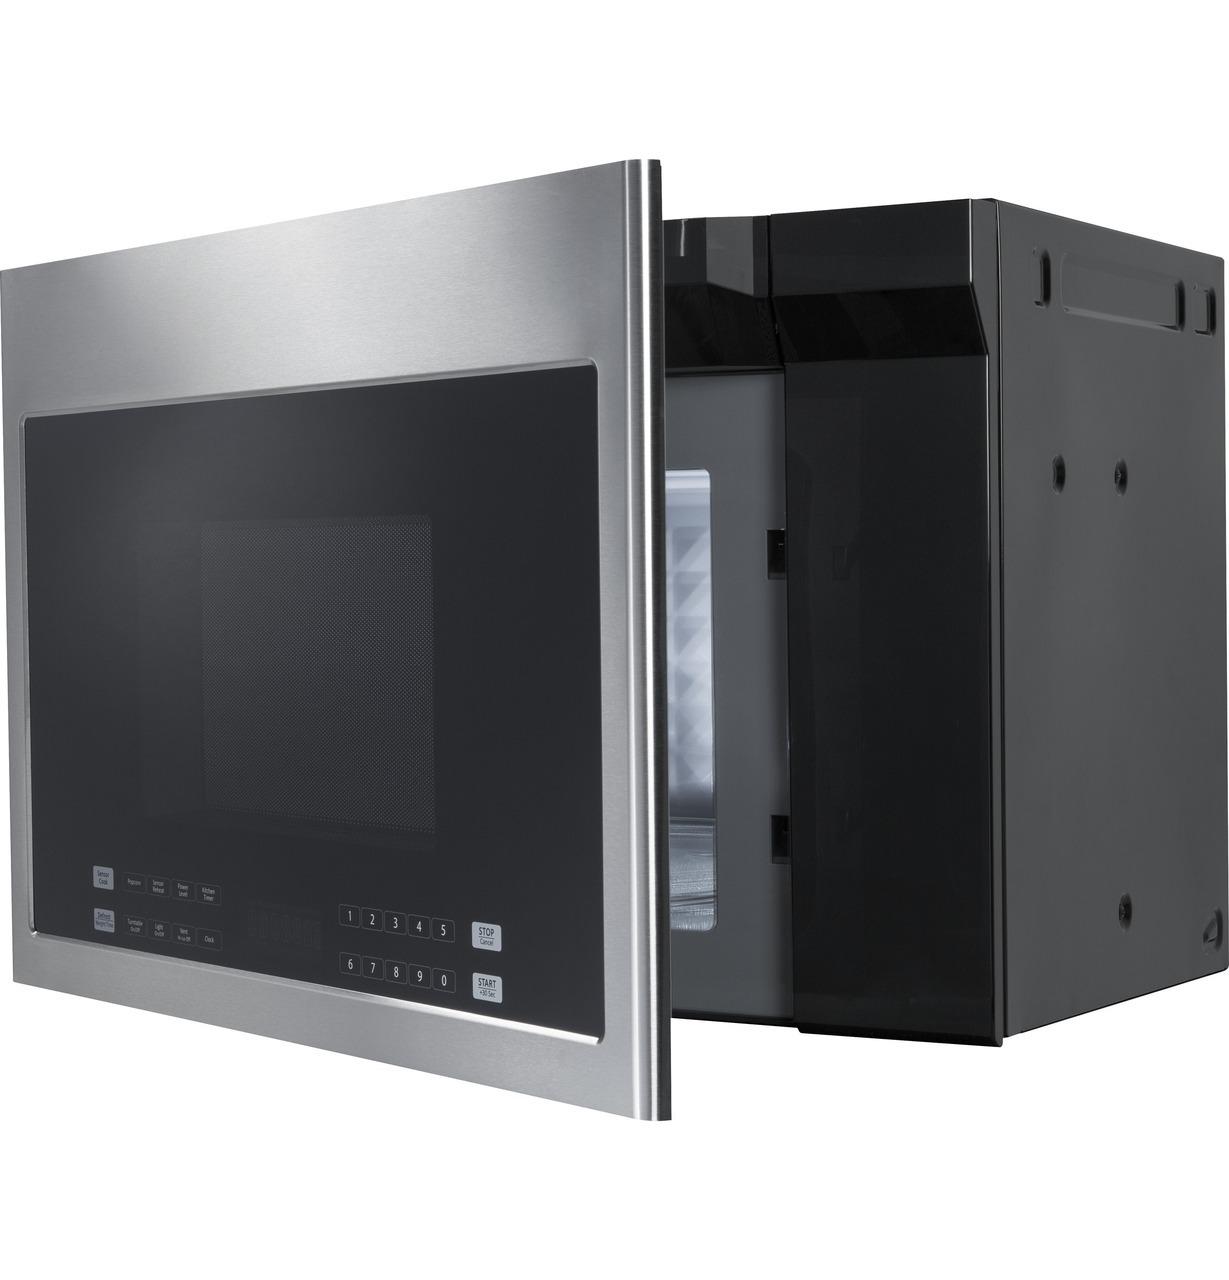 24" 1.4 Cu. Ft. Over-The-Range Microwave Oven